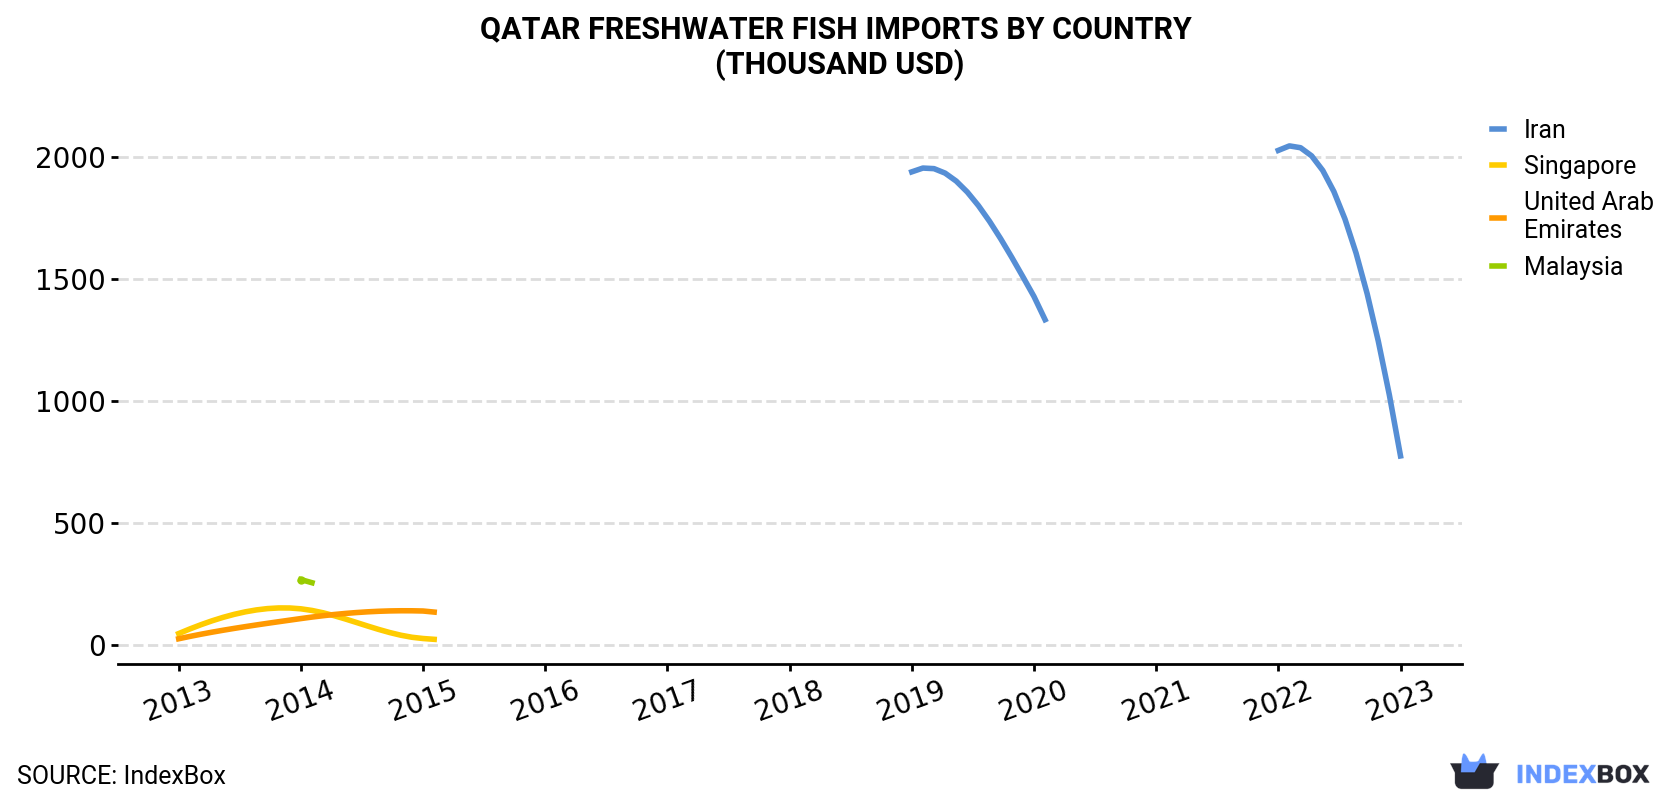 Qatar Freshwater Fish Imports By Country (Thousand USD)